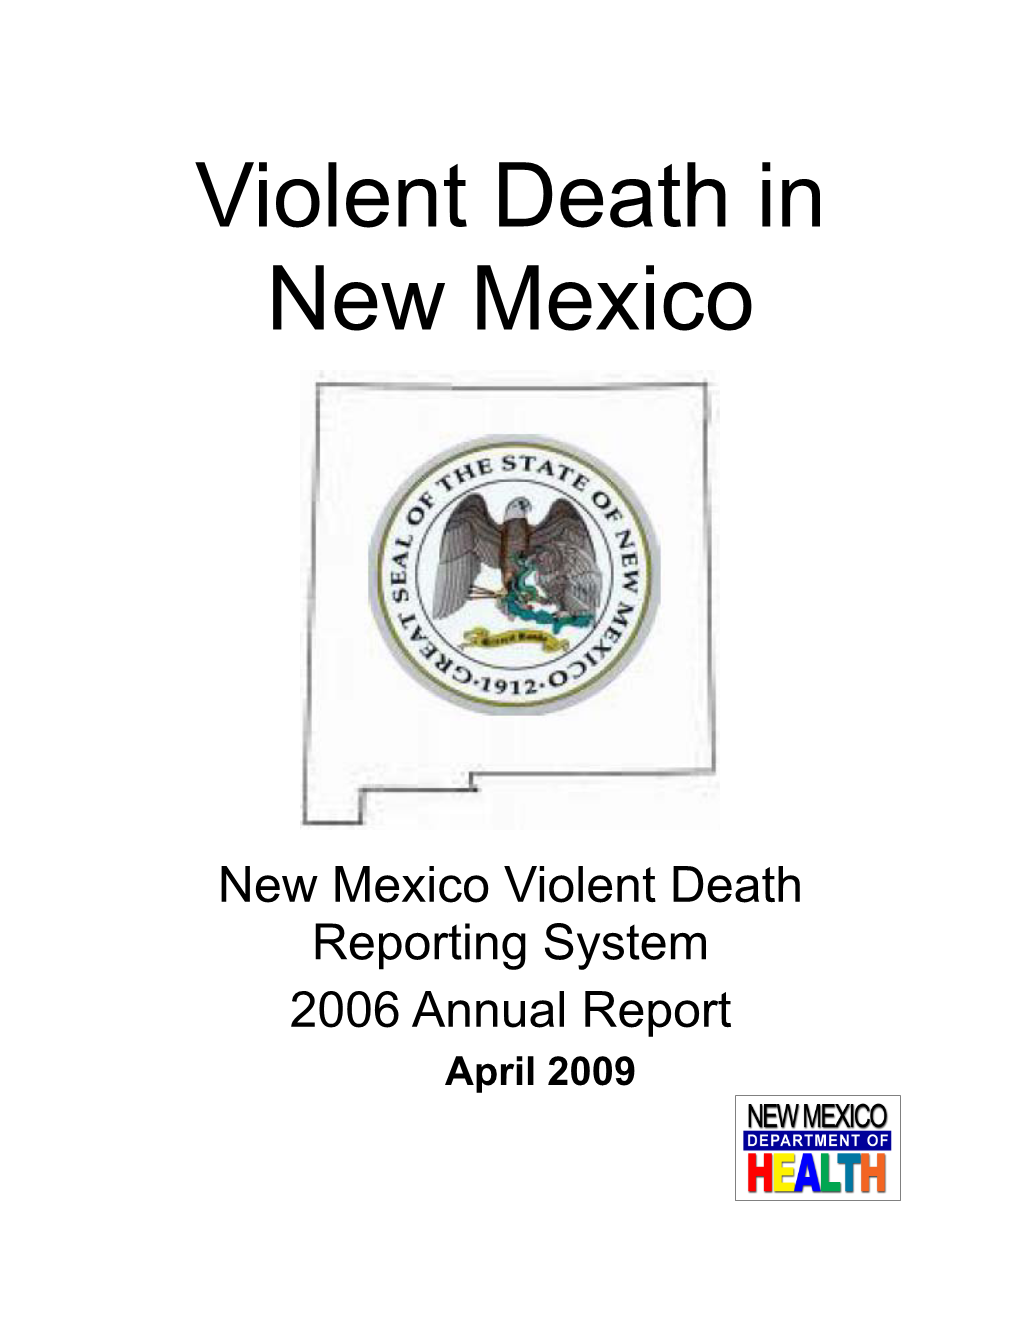 Violent Death in New Mexico 2006